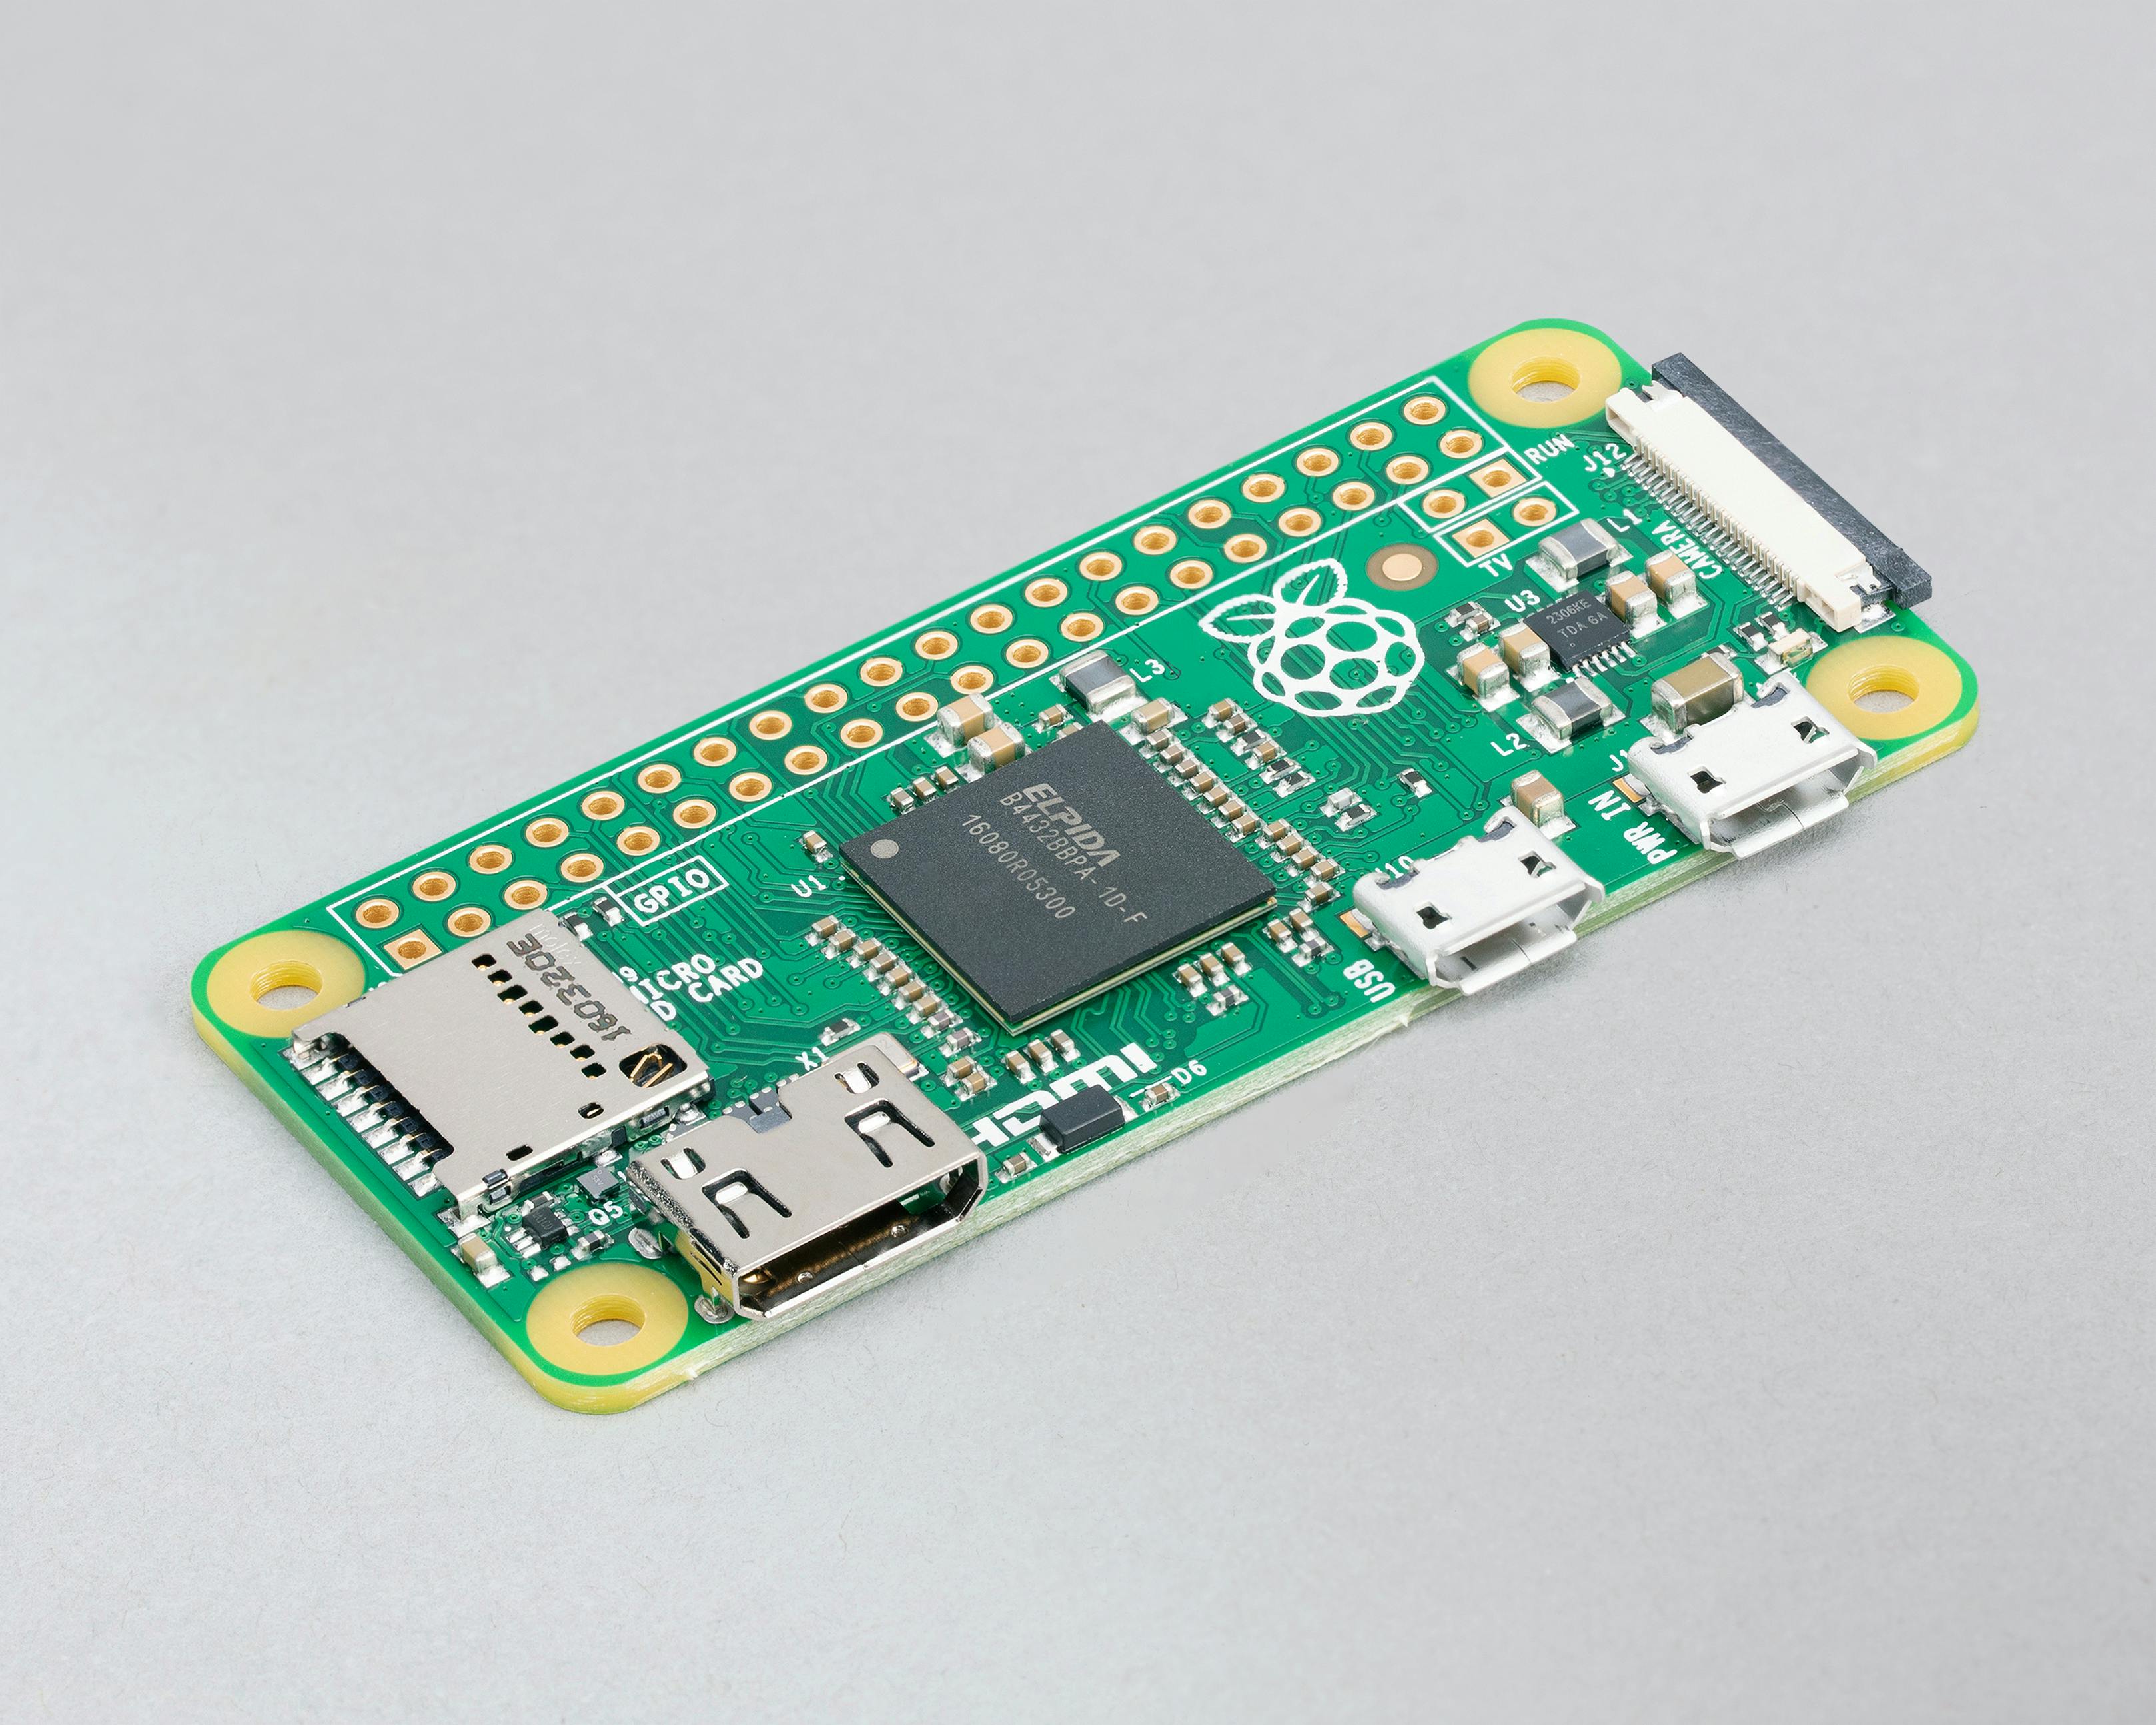 Introducing Raspberry Pi Imager, our new imaging utility